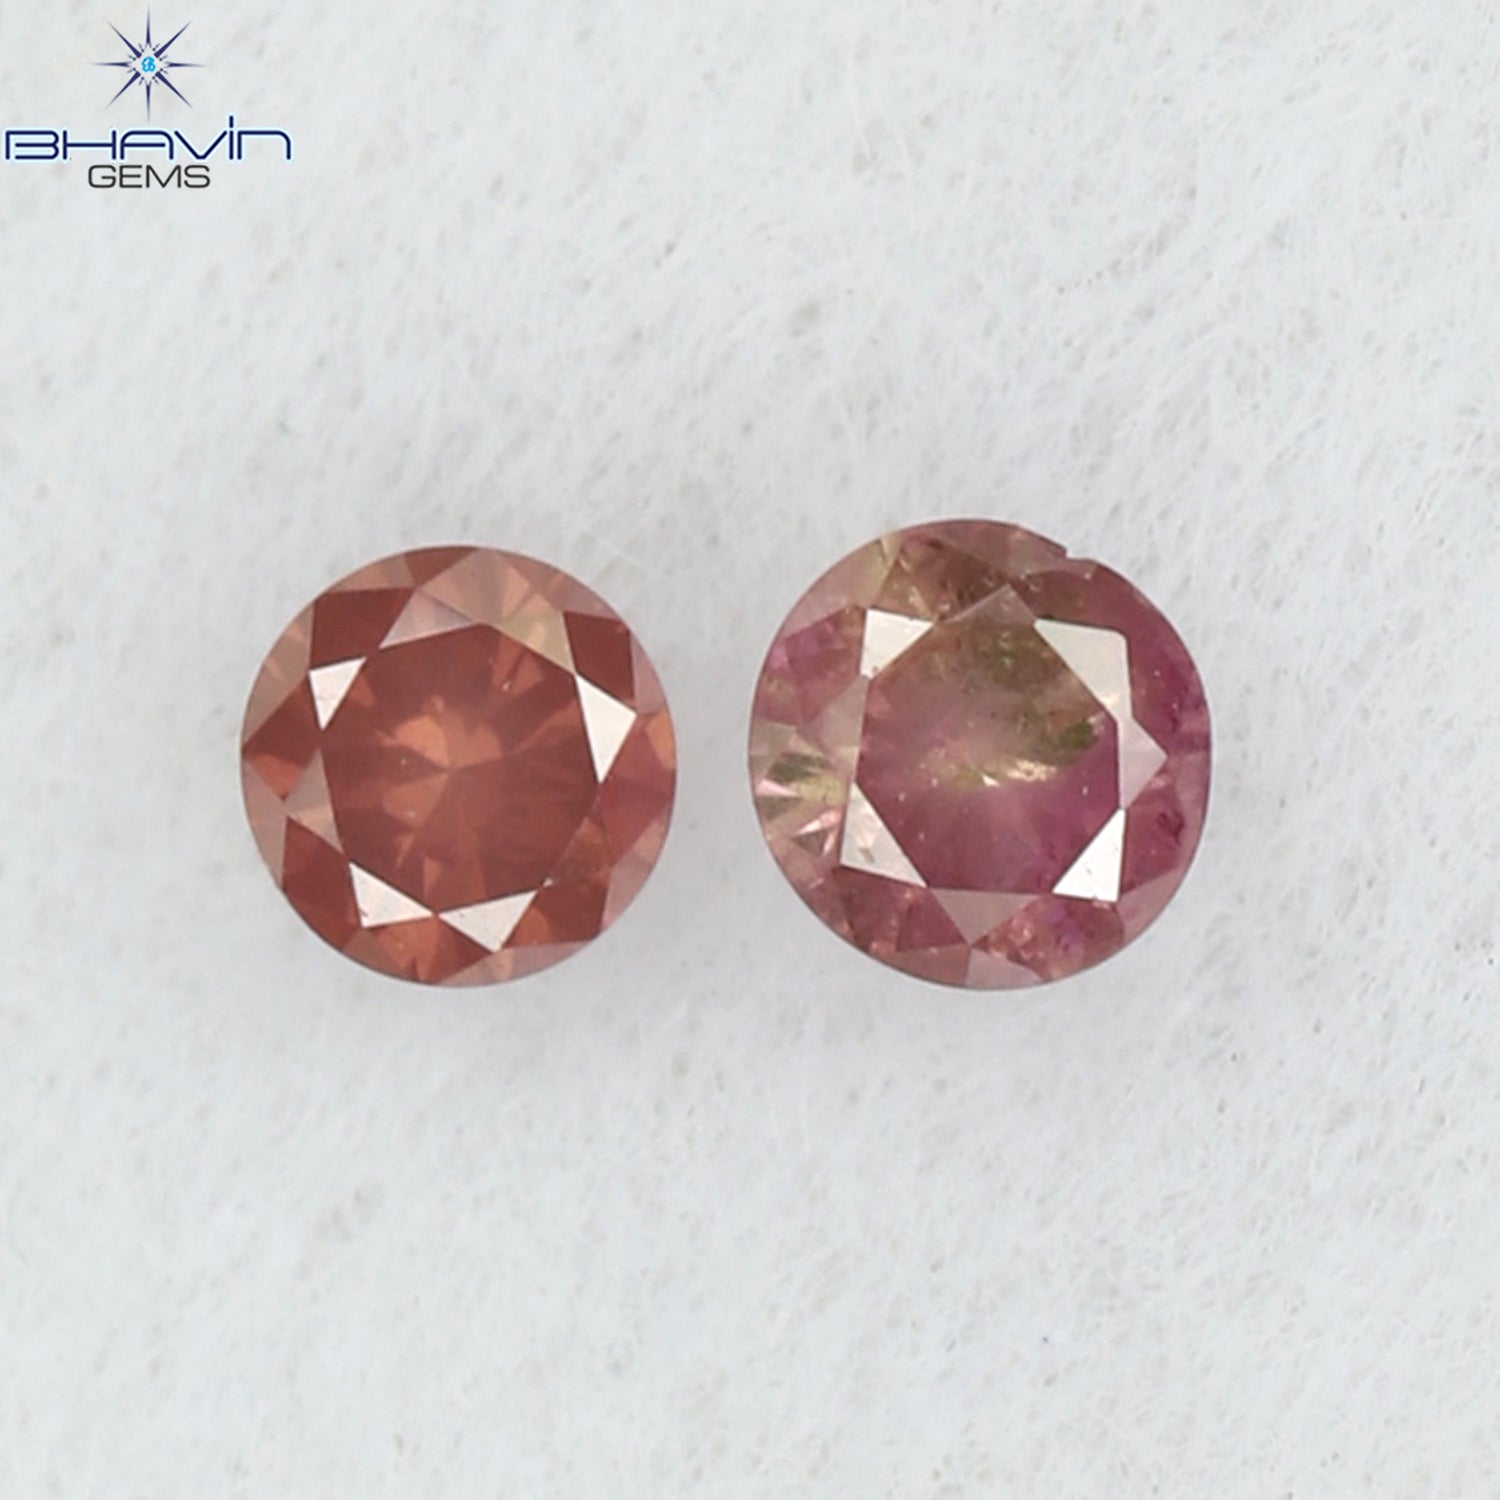 0.06 CT/2 Pcs Round Shape Natural Loose Diamond Pink Color I3 Clarity (1.85 MM)